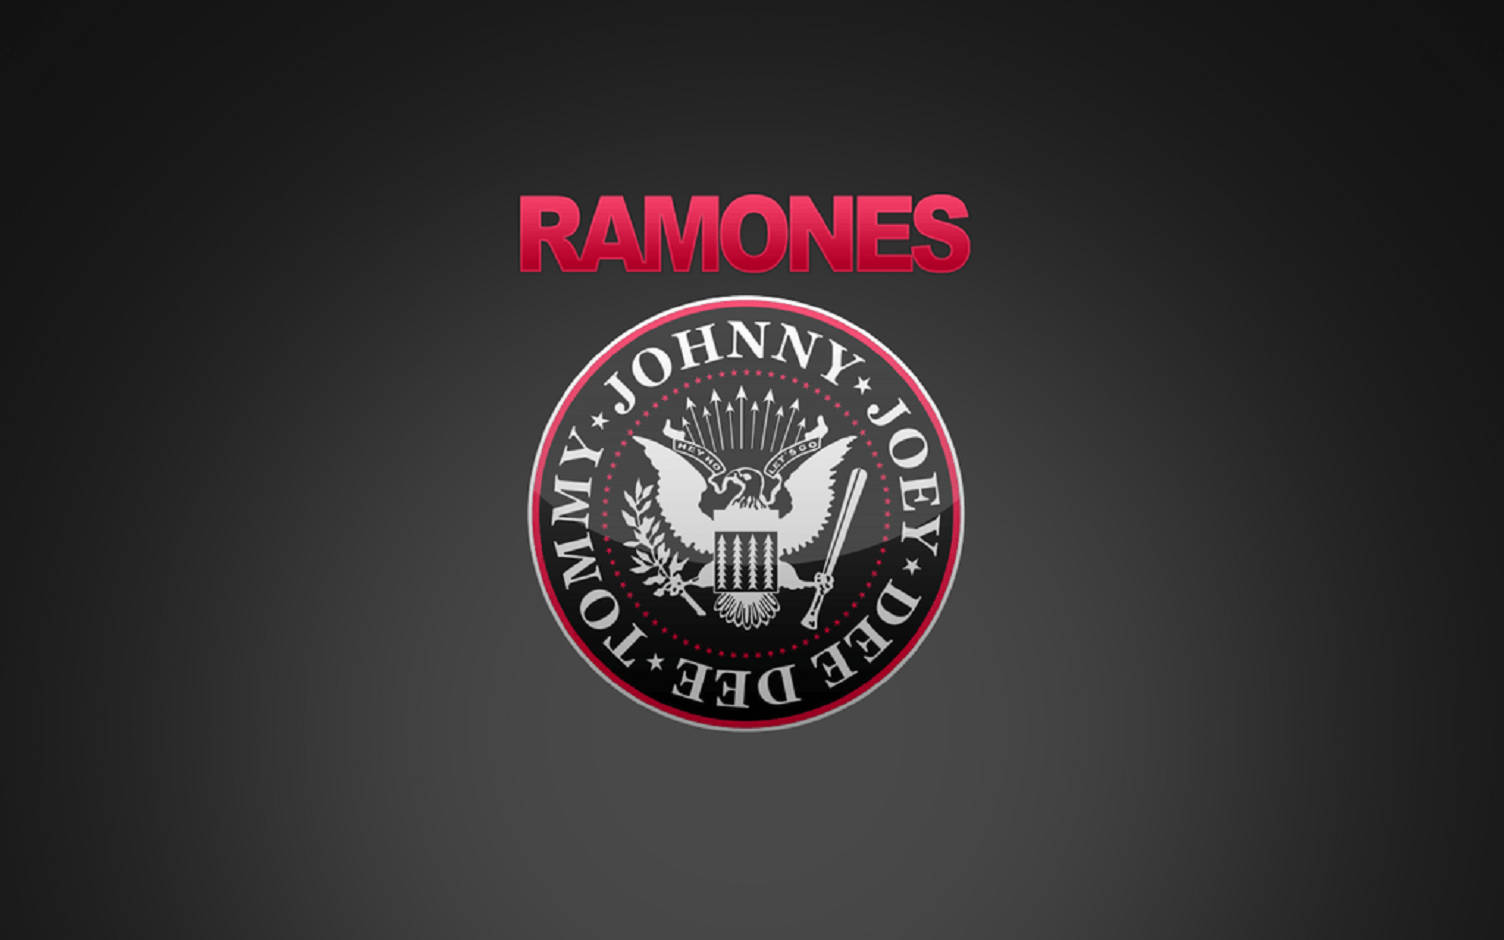 American Rock Band Ramones Eagle Seal Logo With Pink Typography